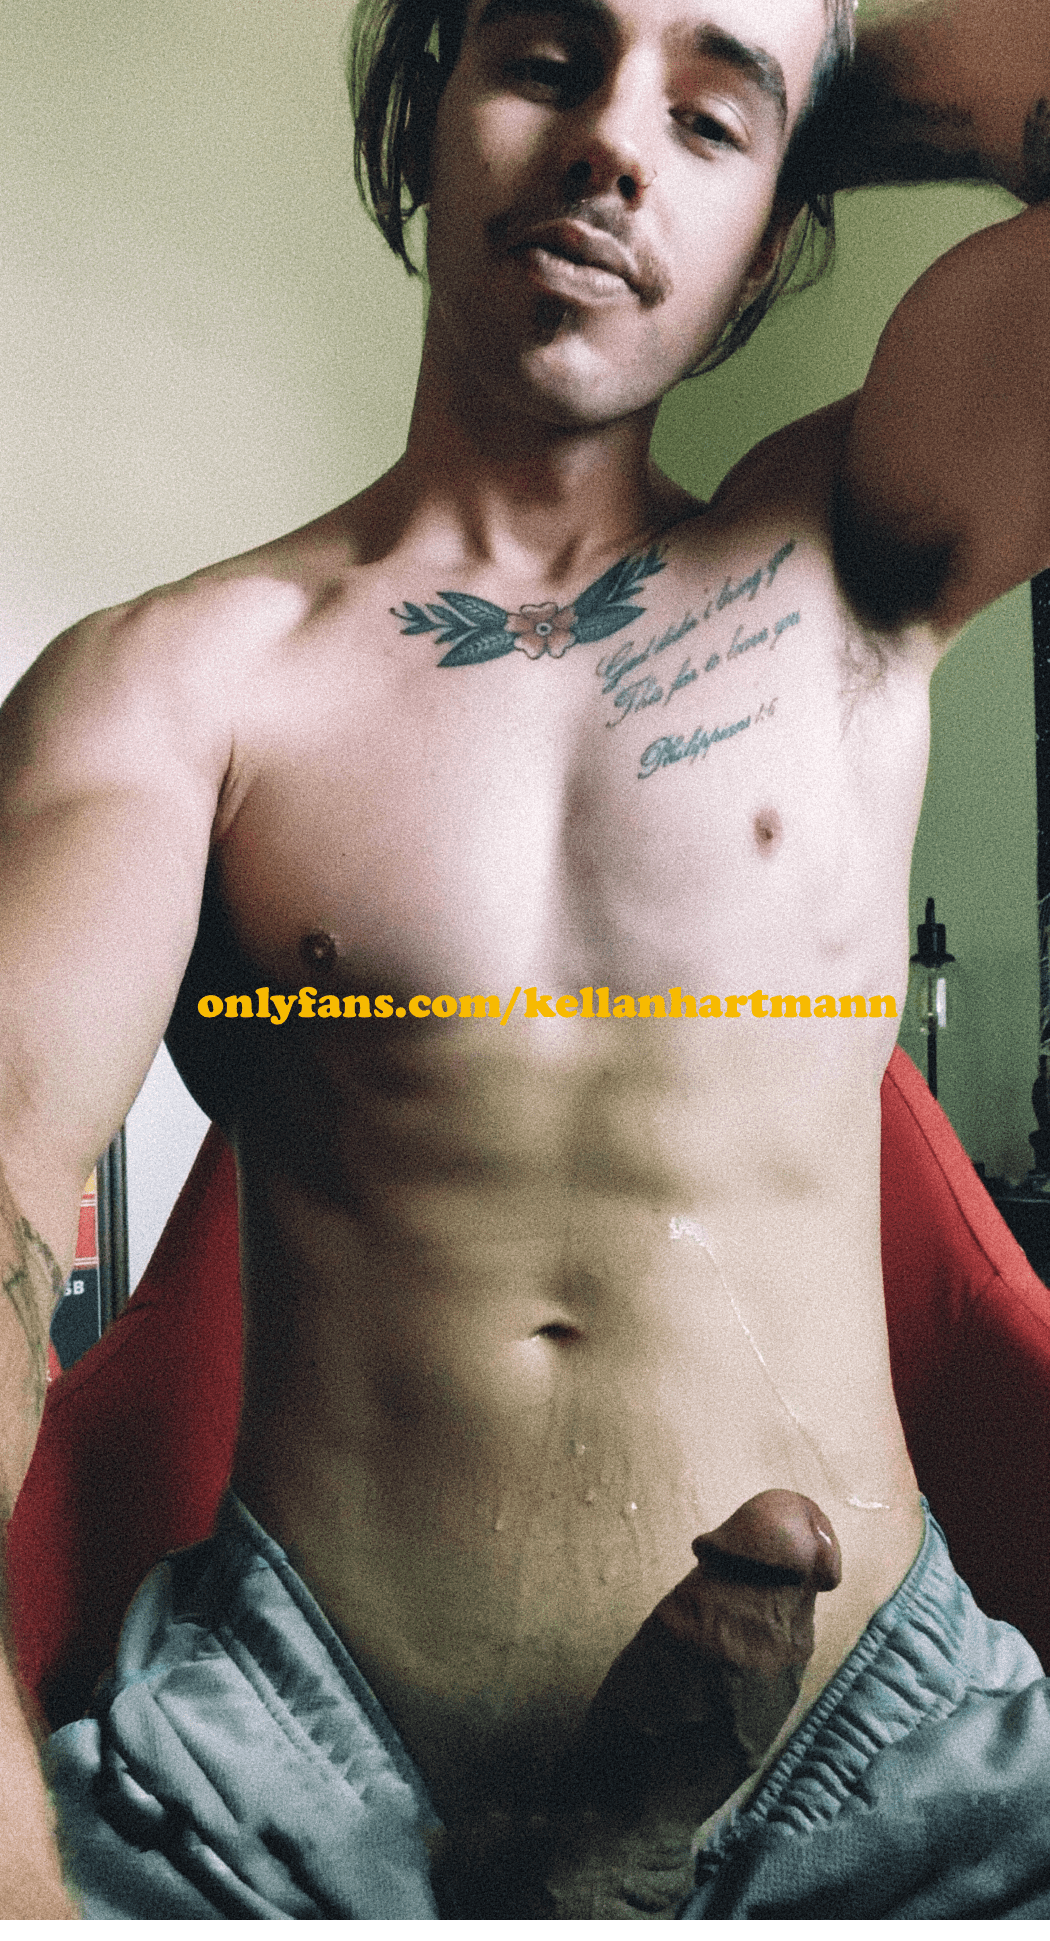 Kellan Hartmann watches porn and leaves his abs covered in cum